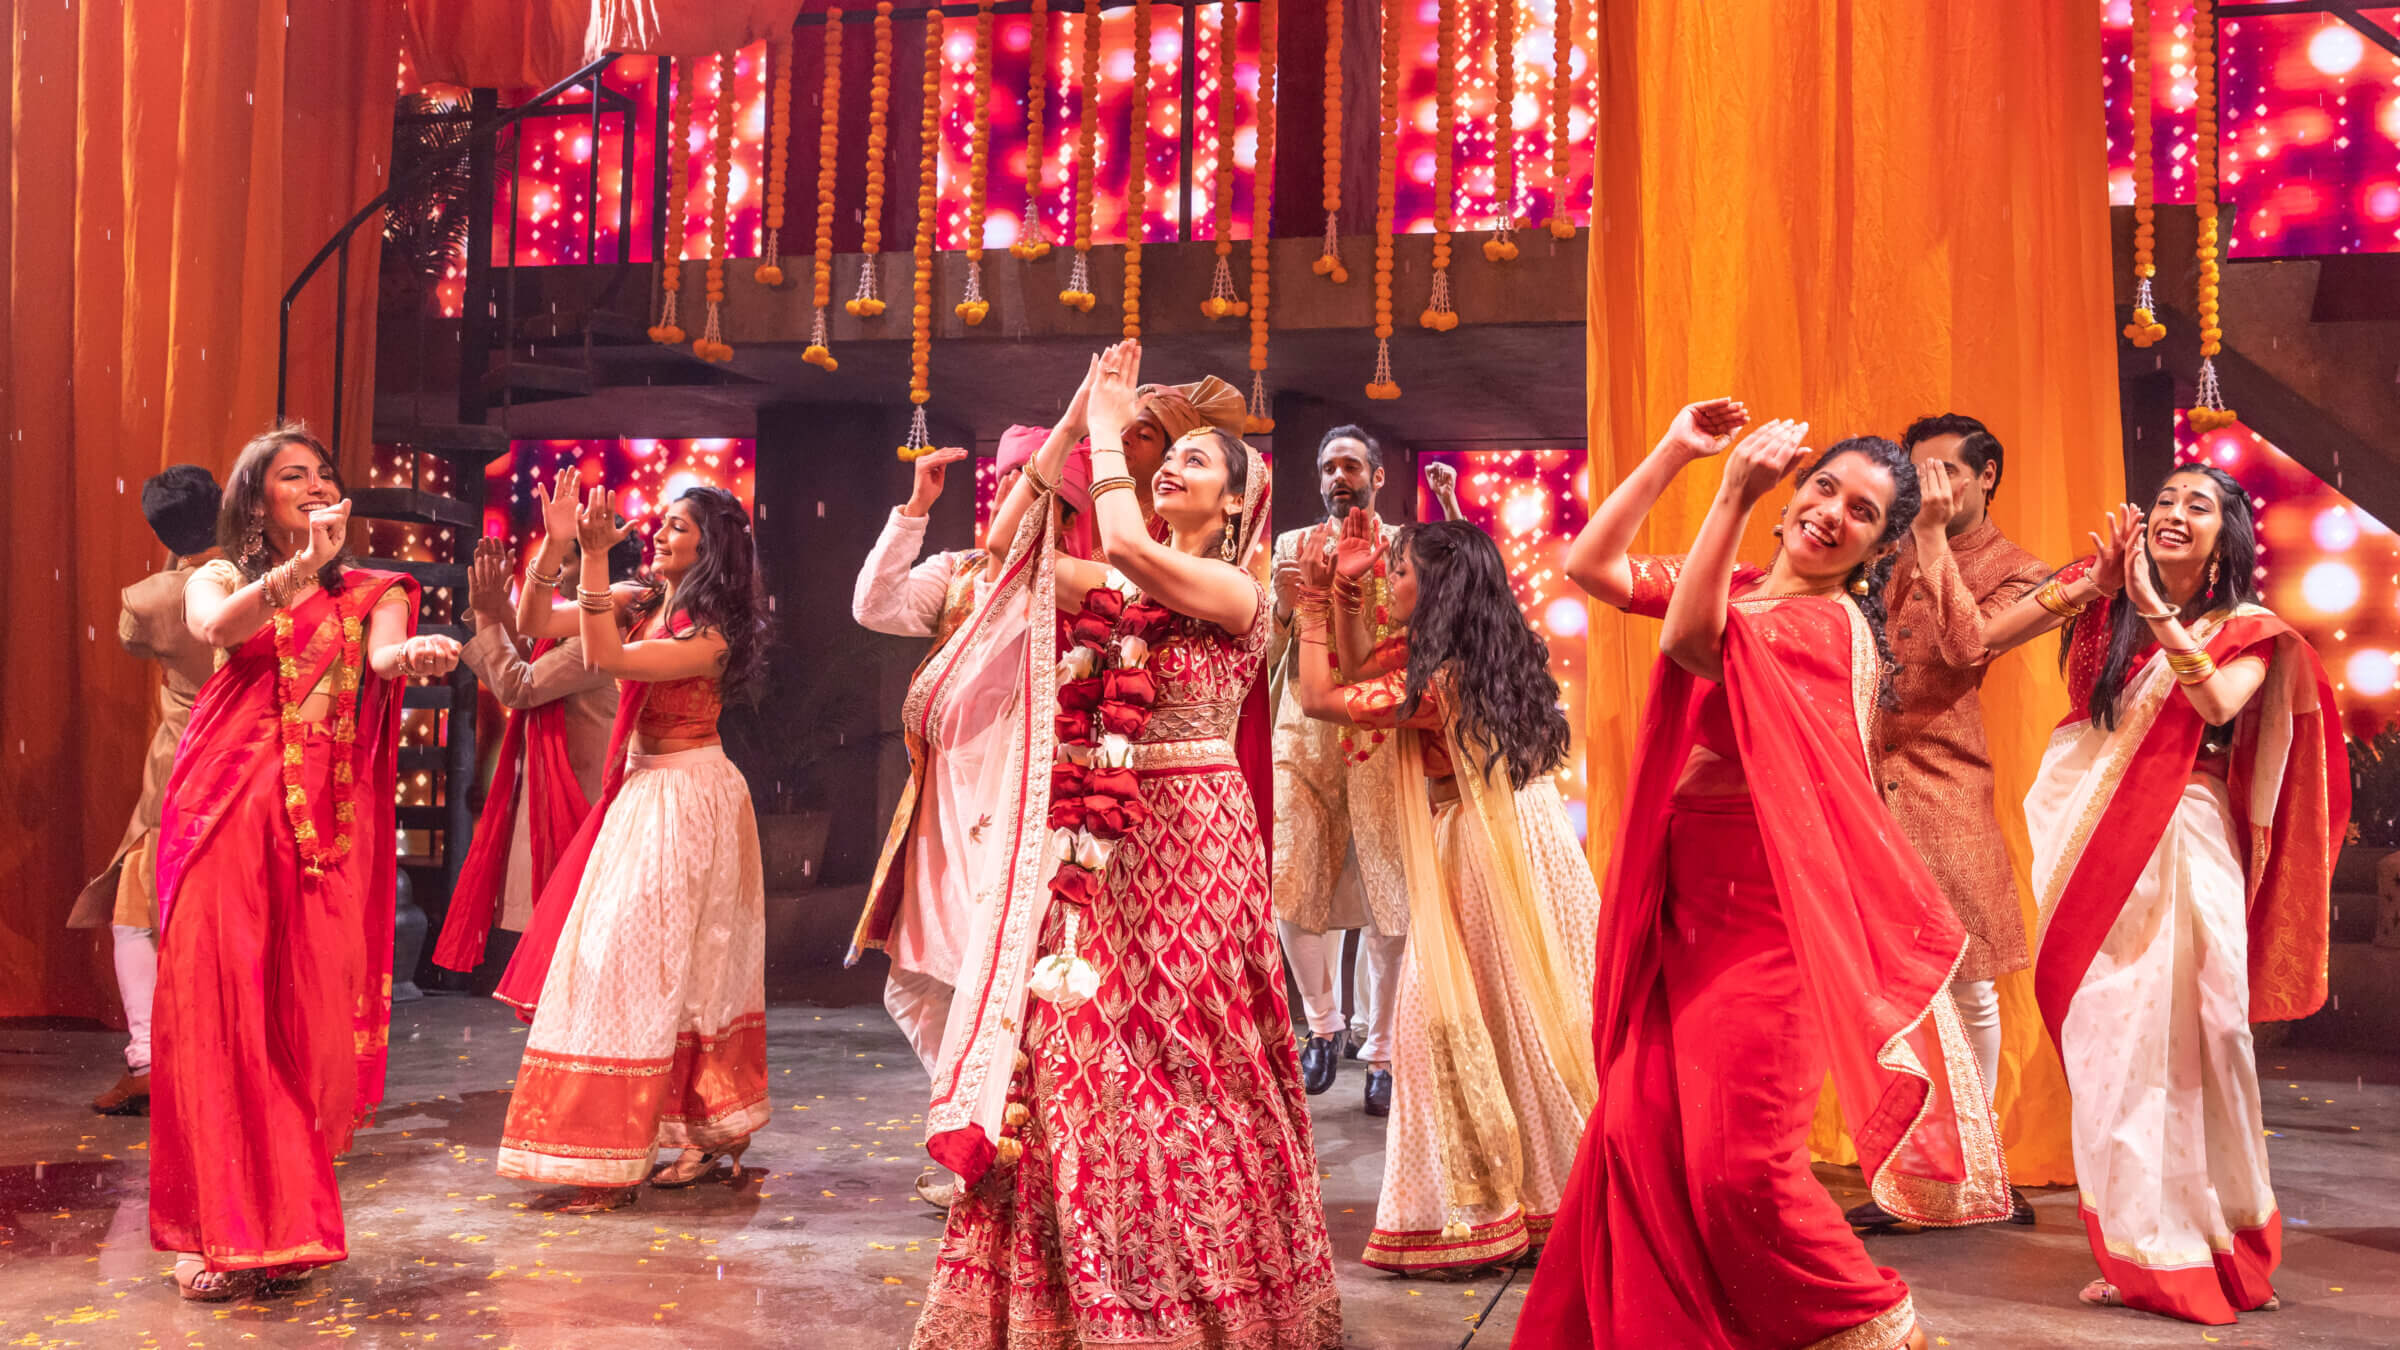 A scene from the musical <i>Monsoon Wedding</i>, which runs through June 25 at St. Ann's Warehouse in Brooklyn, N.Y.